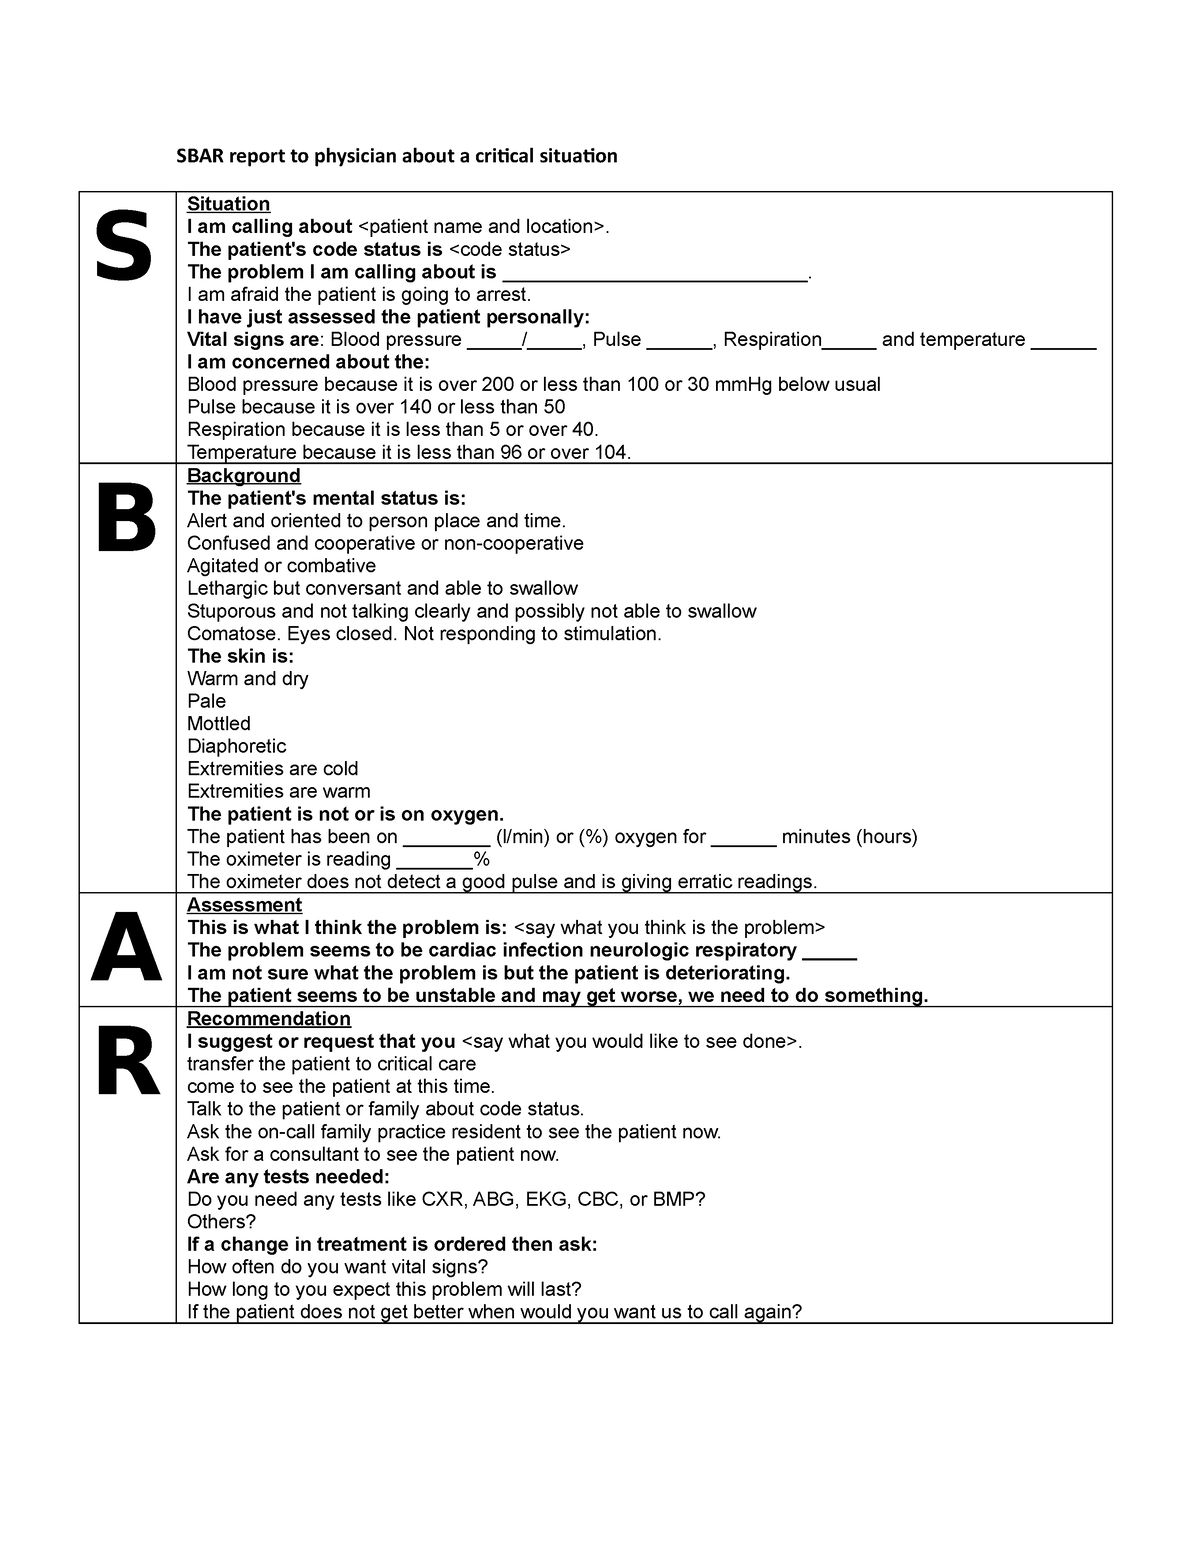 SBAR report sheet with Sections - SBAR report to physician about a ...